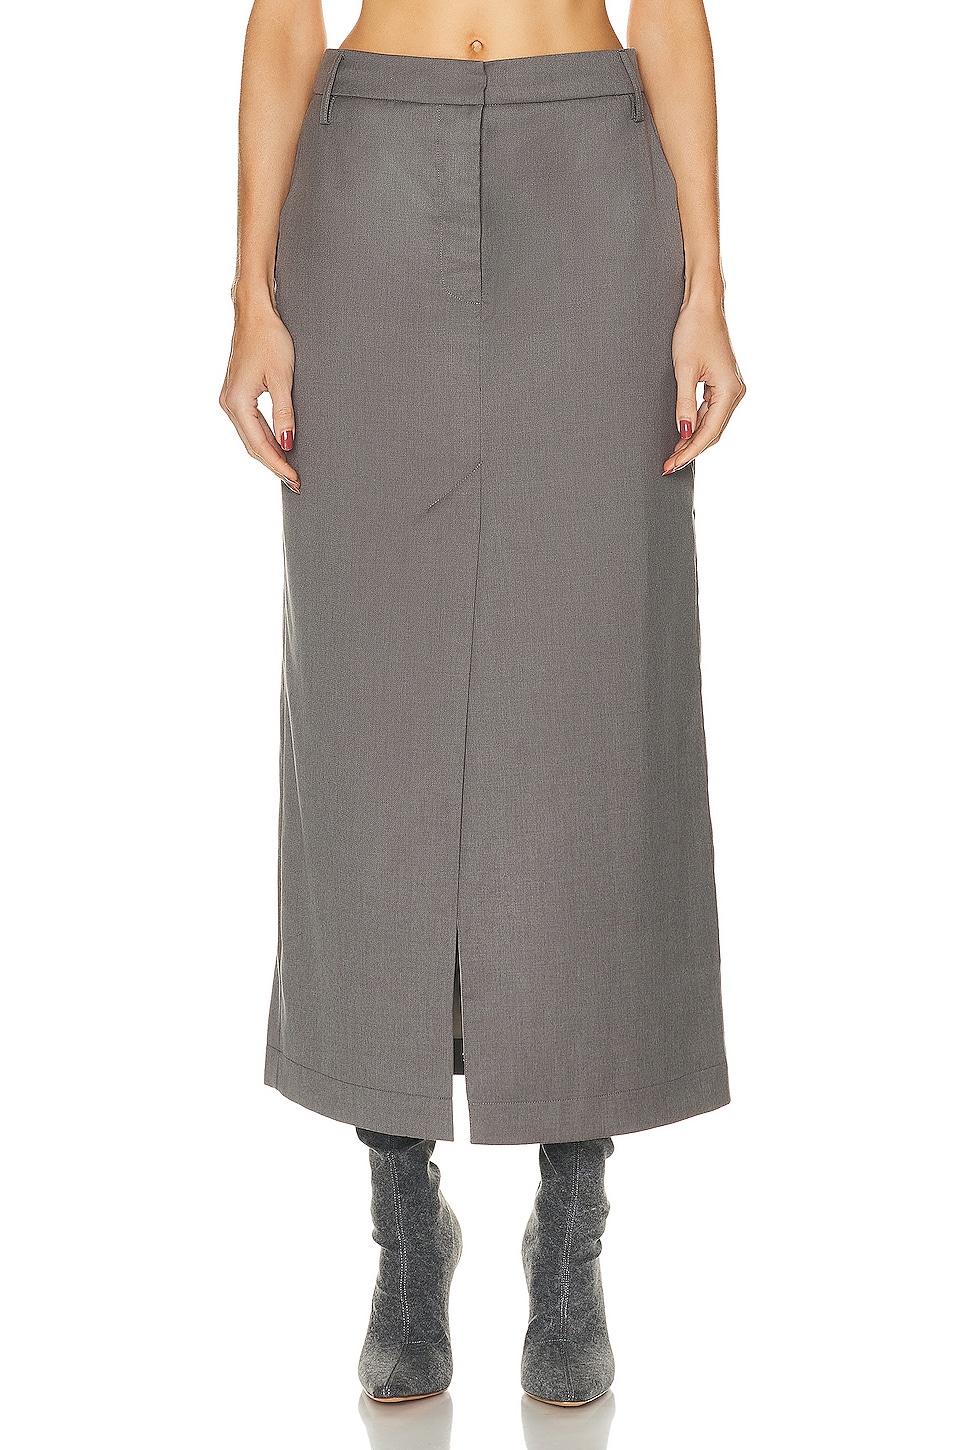 Image 1 of REMAIN Long Suiting Skirt in Dark Gull Gray